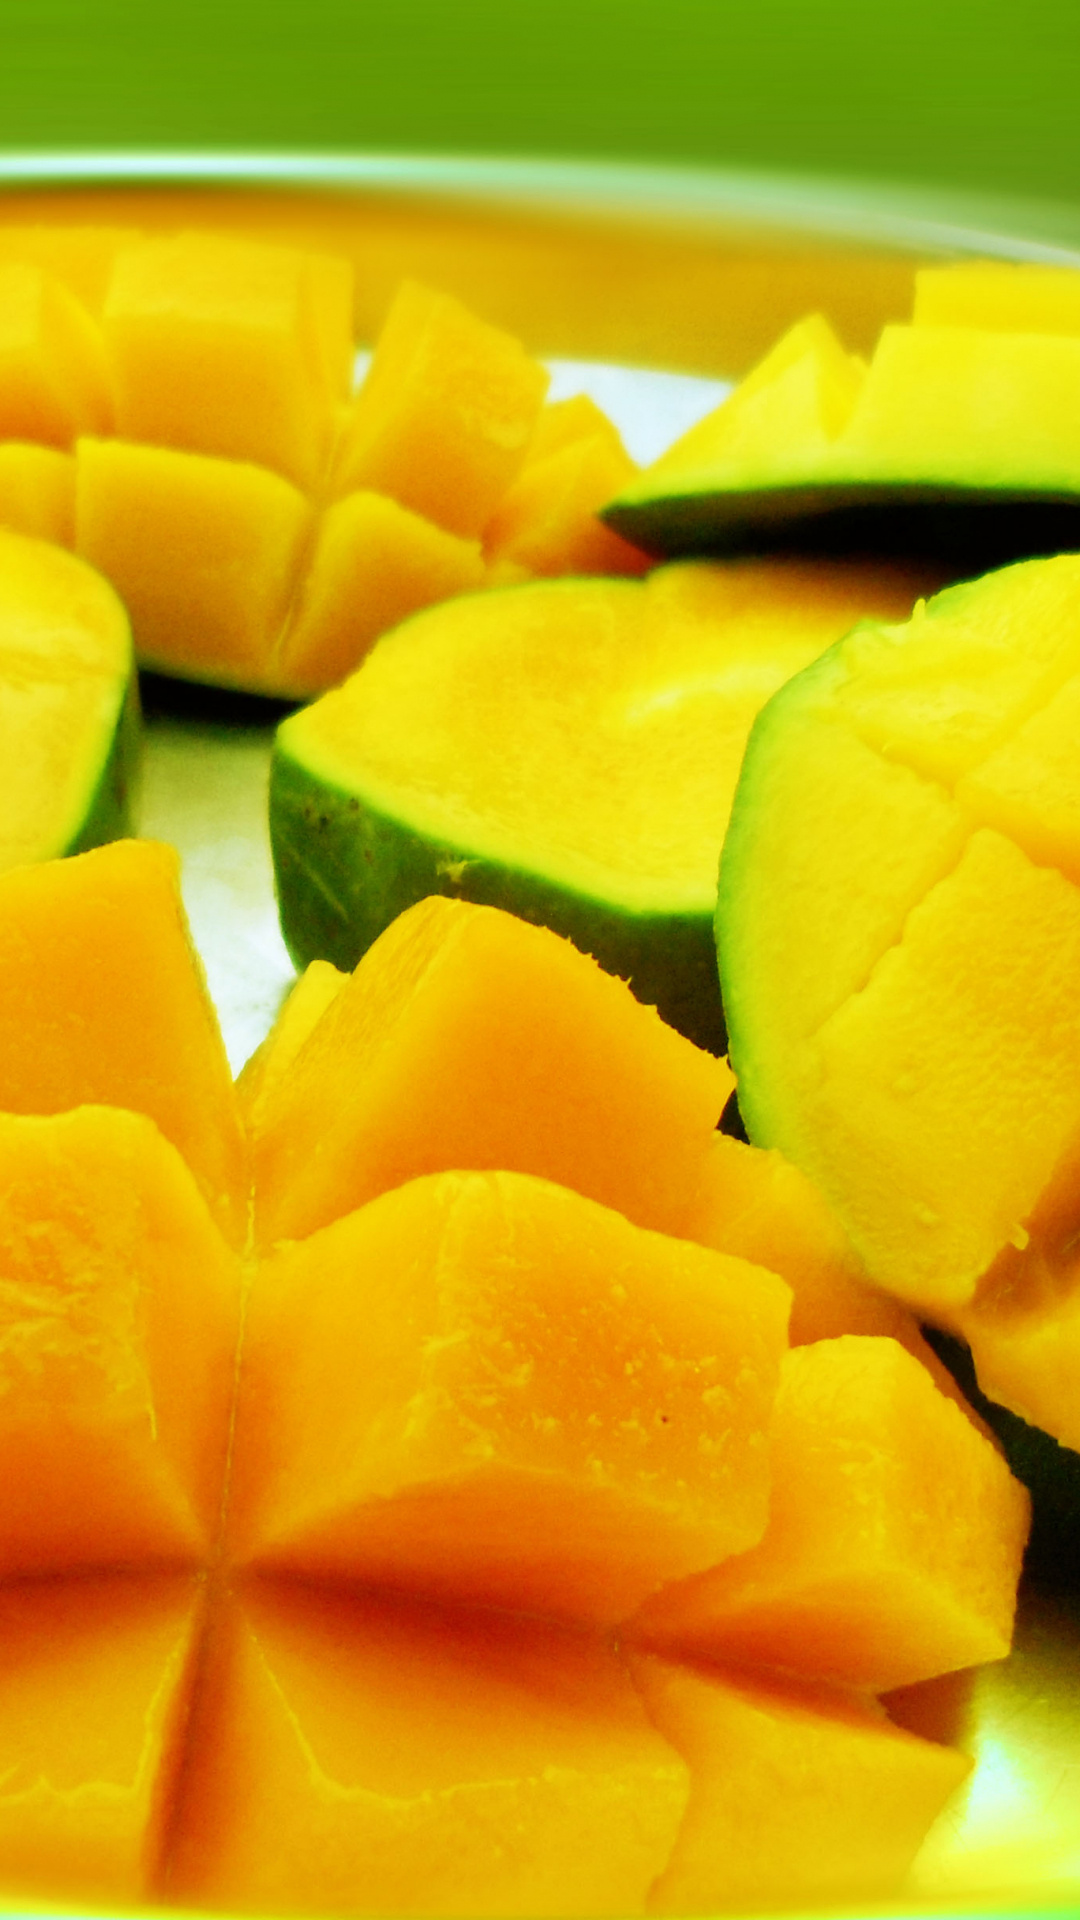 Mango: A great source of magnesium and potassium. 1080x1920 Full HD Background.